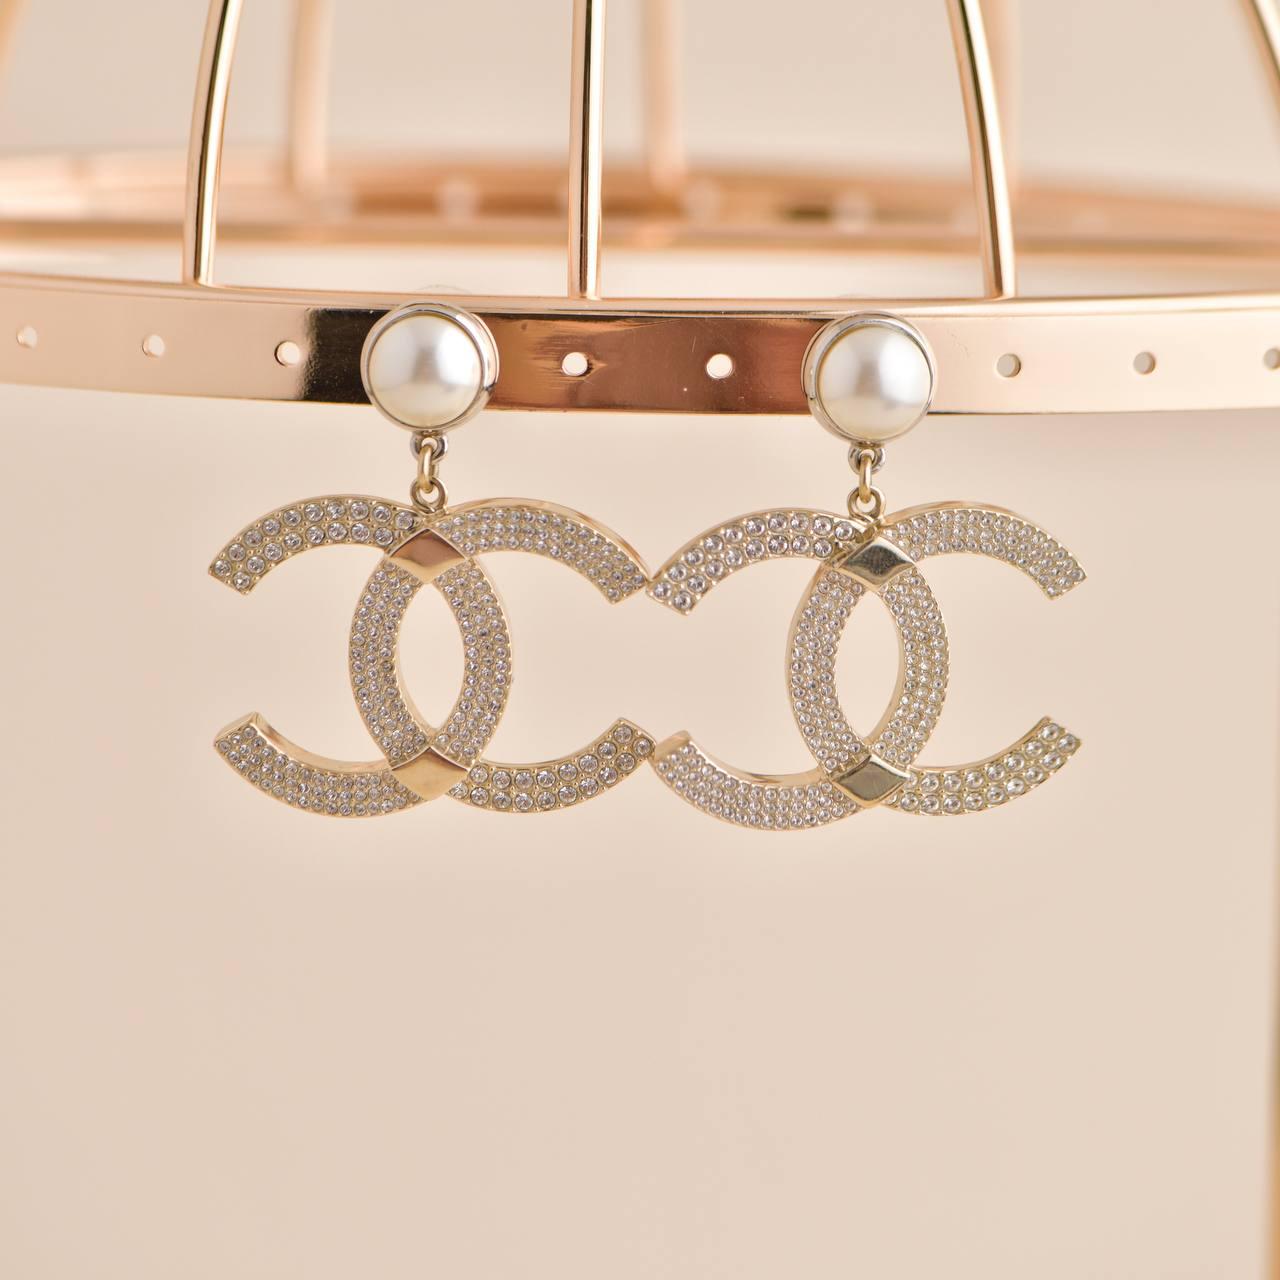 Brilliant Cut Chanel CC Faux Pearl Earrings From The 2021 Collection